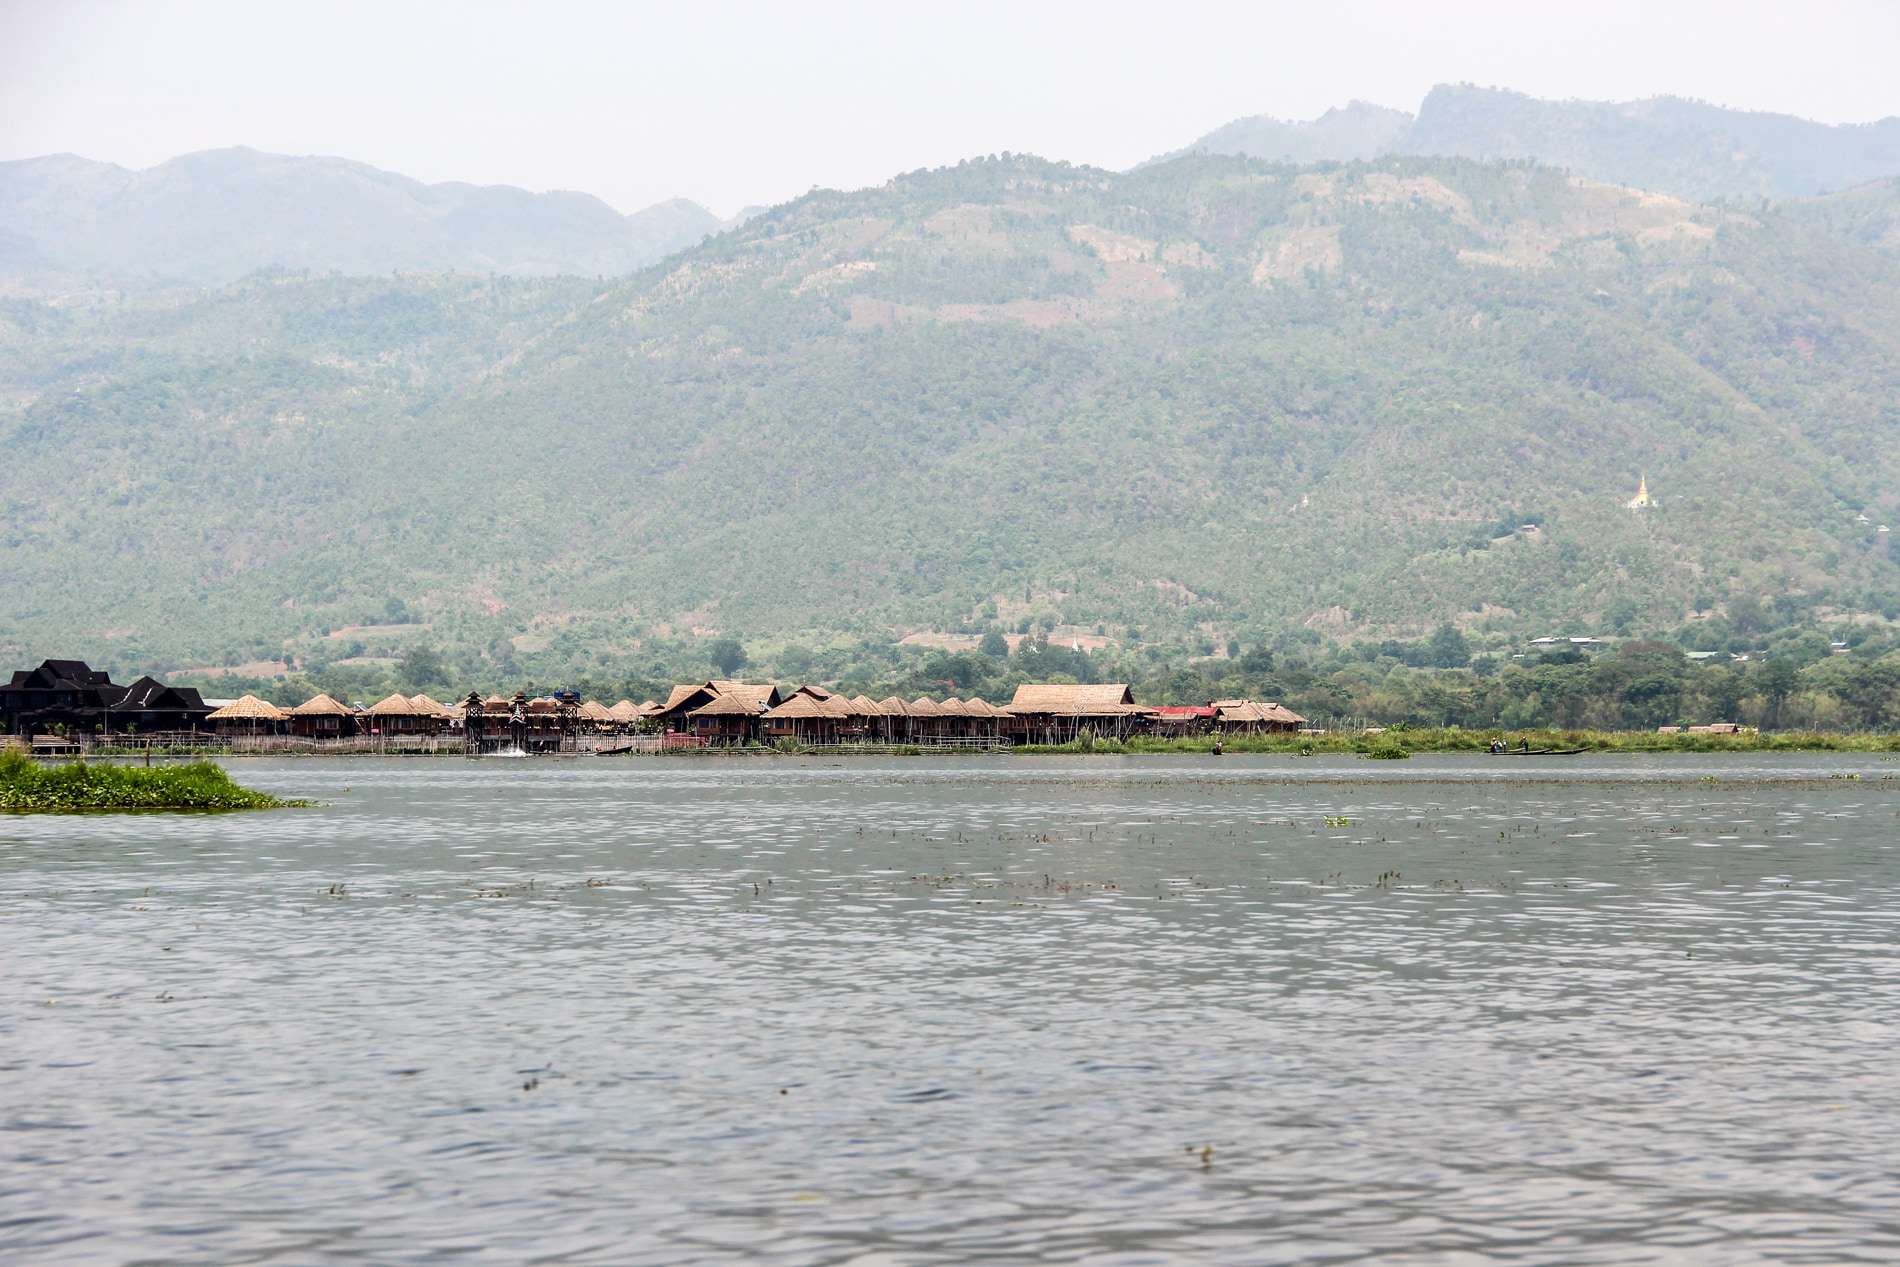 Distanced view of a community of bamboo stilt houses in the middle of the vast Inle Lake basin surrounded by mountains. 